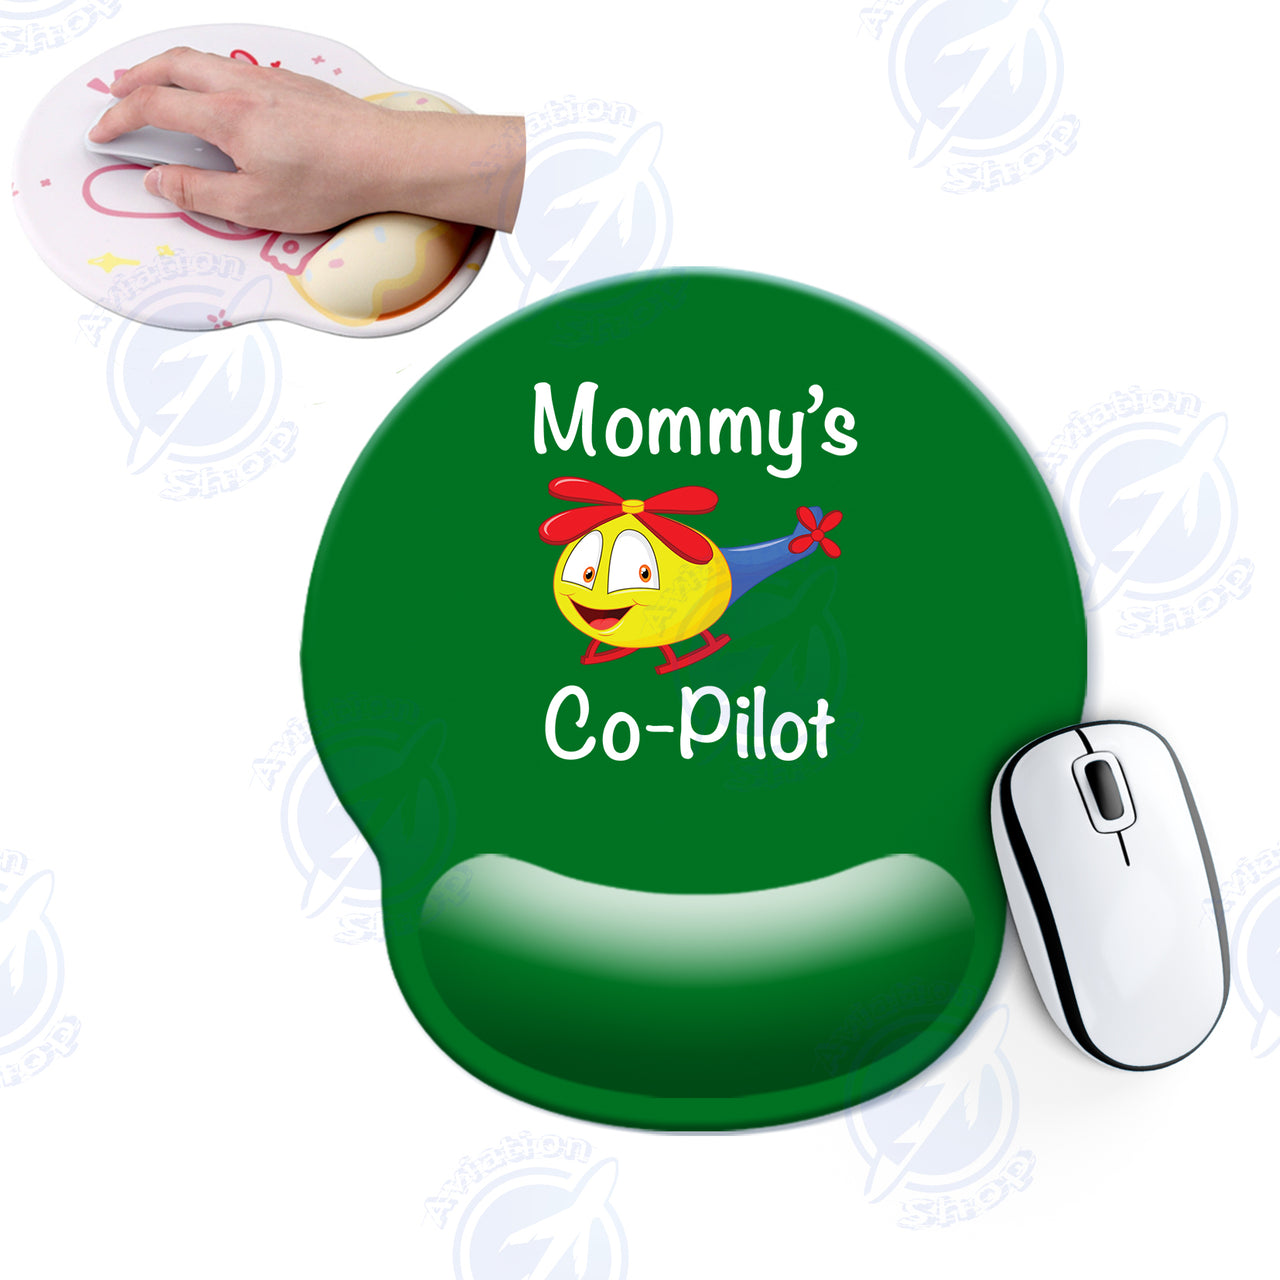 Mommy's Co-Pilot (Helicopter) Designed Ergonomic Mouse Pads